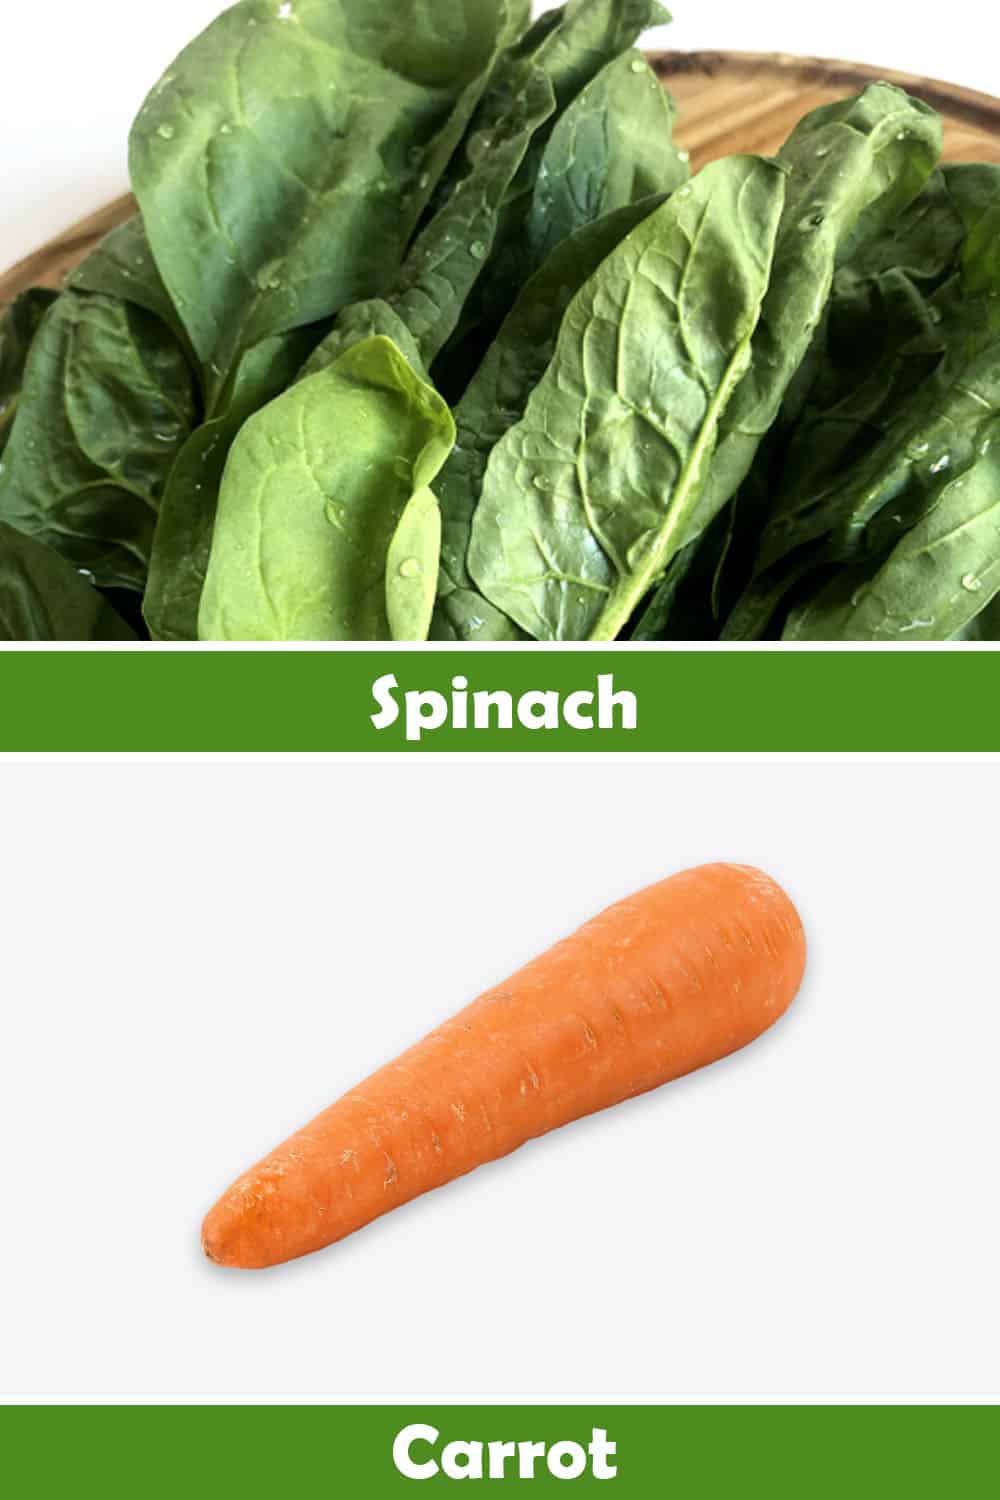 SPINACH AND CARROT